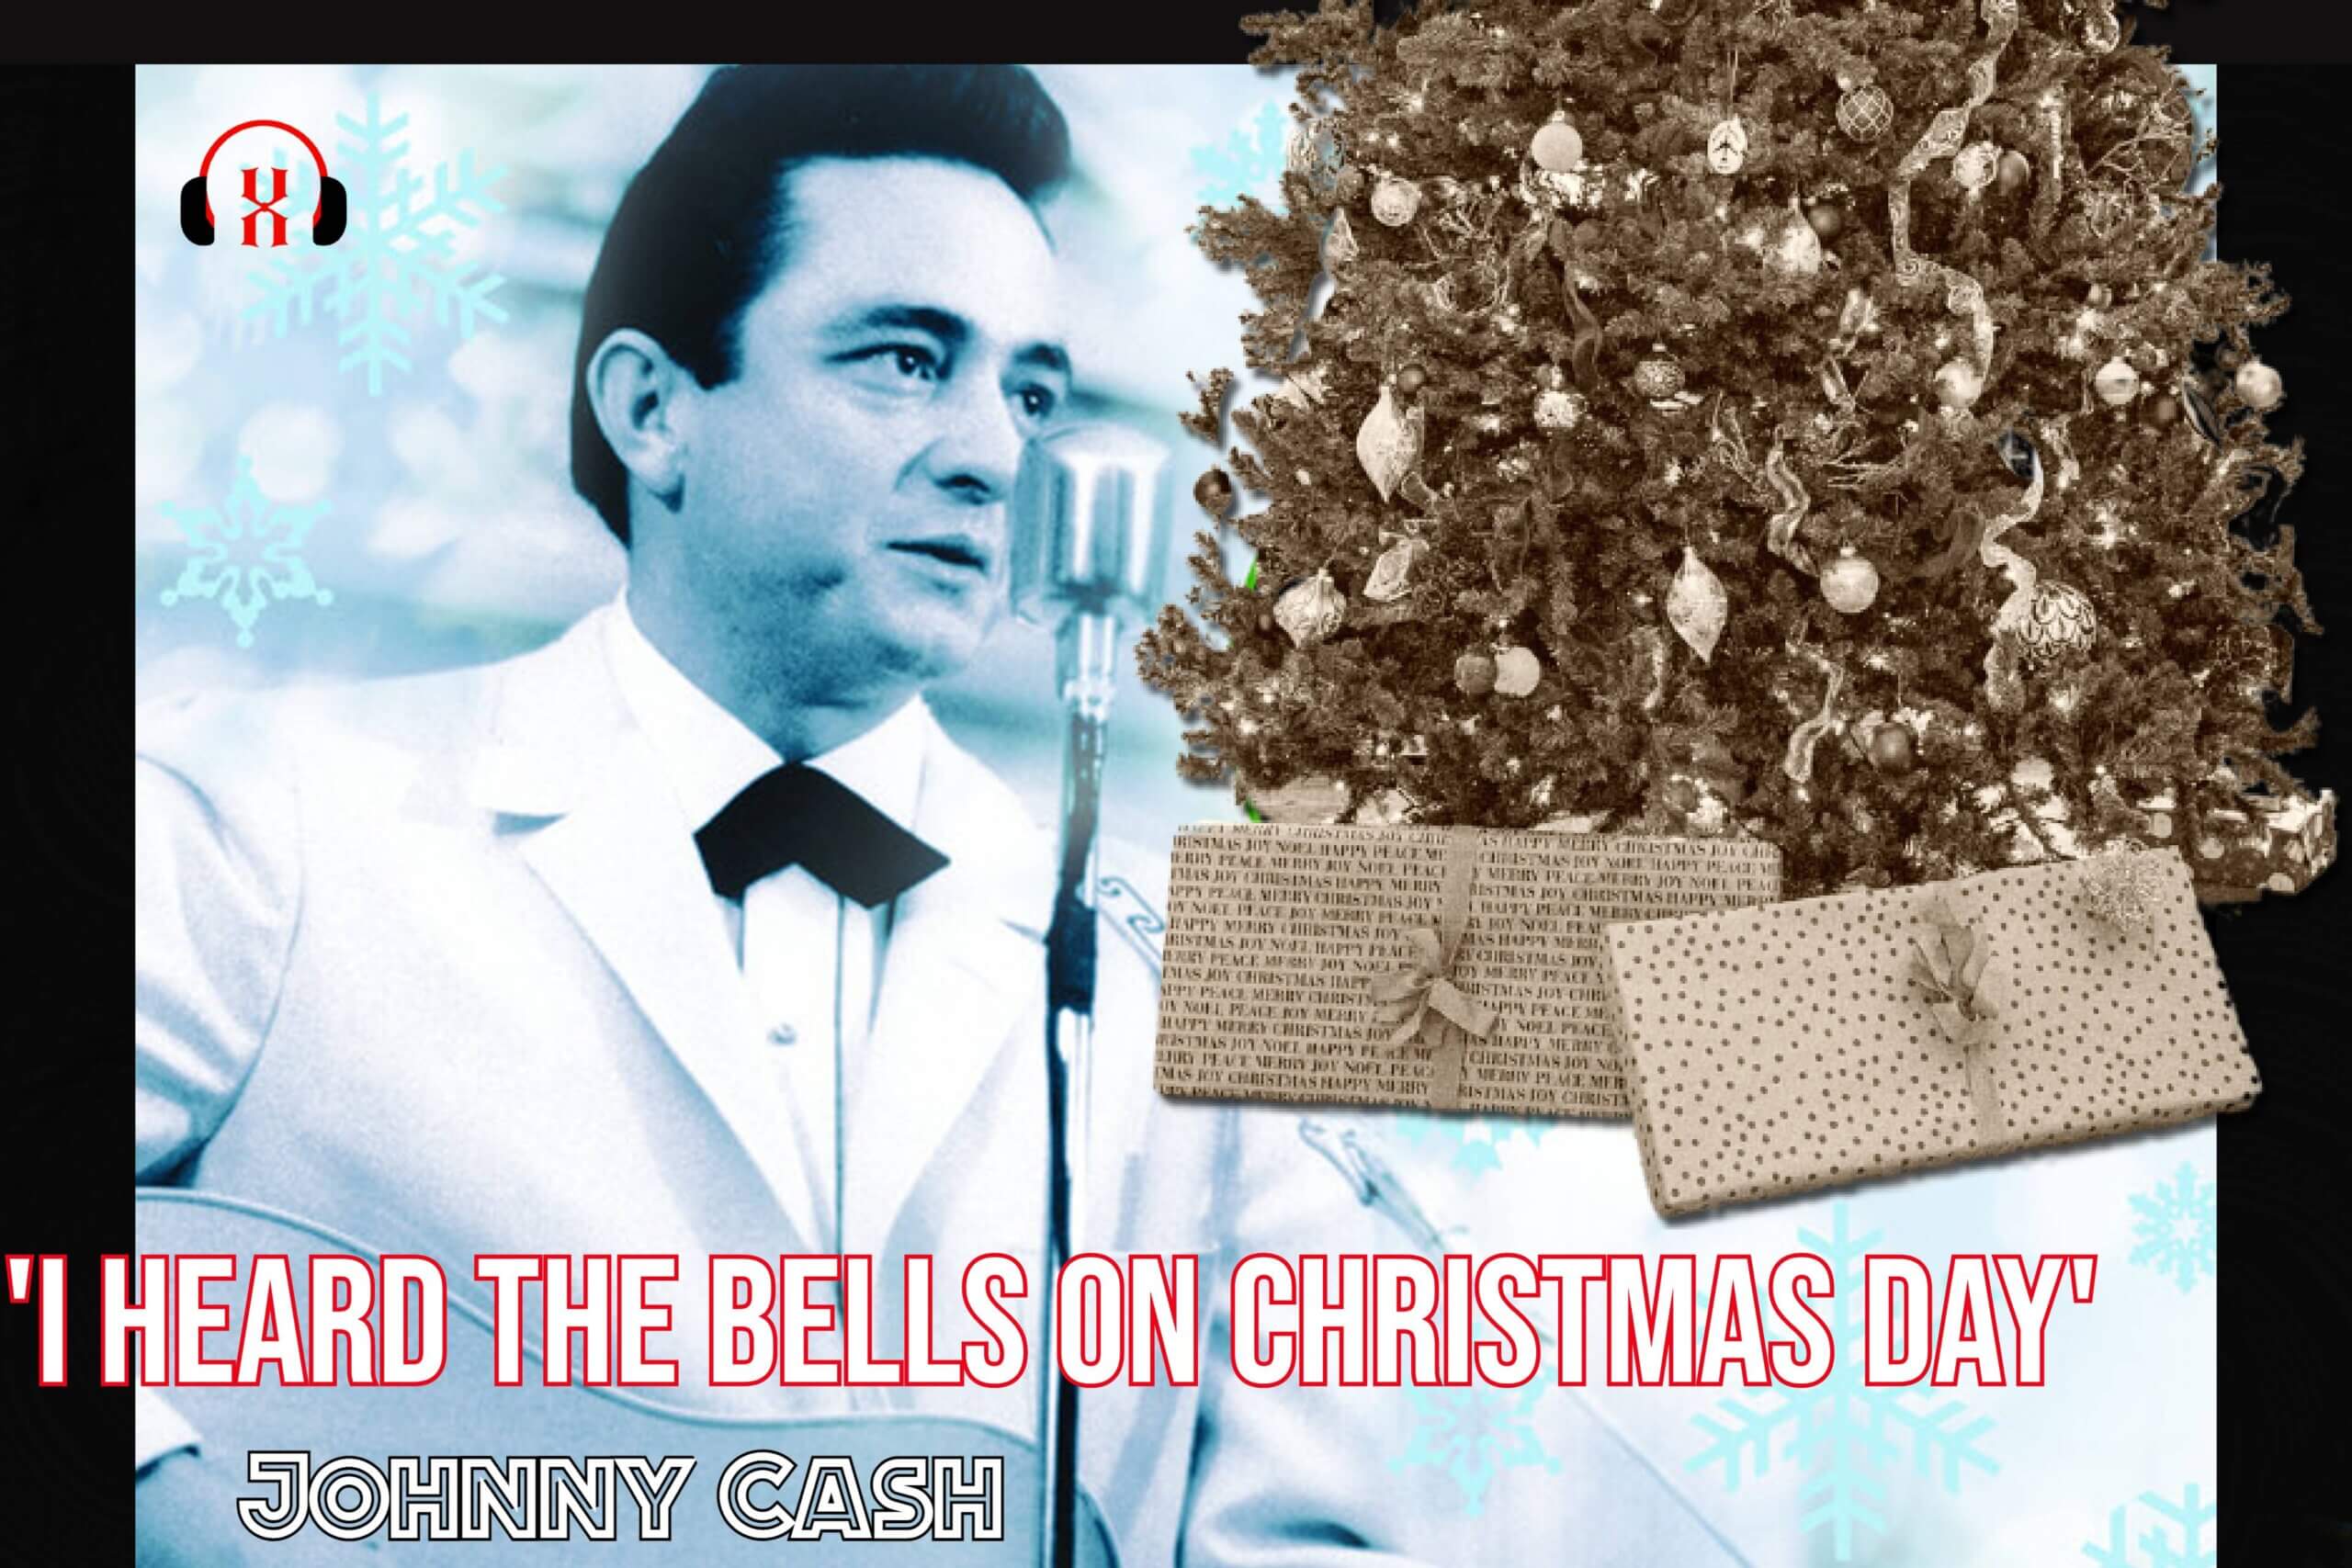 “Johnny Cash’s Christmas Symphony: The Timeless Tale Behind ‘I Heard the Bells on Christmas Day’ That Strikes a Chord of Hope”